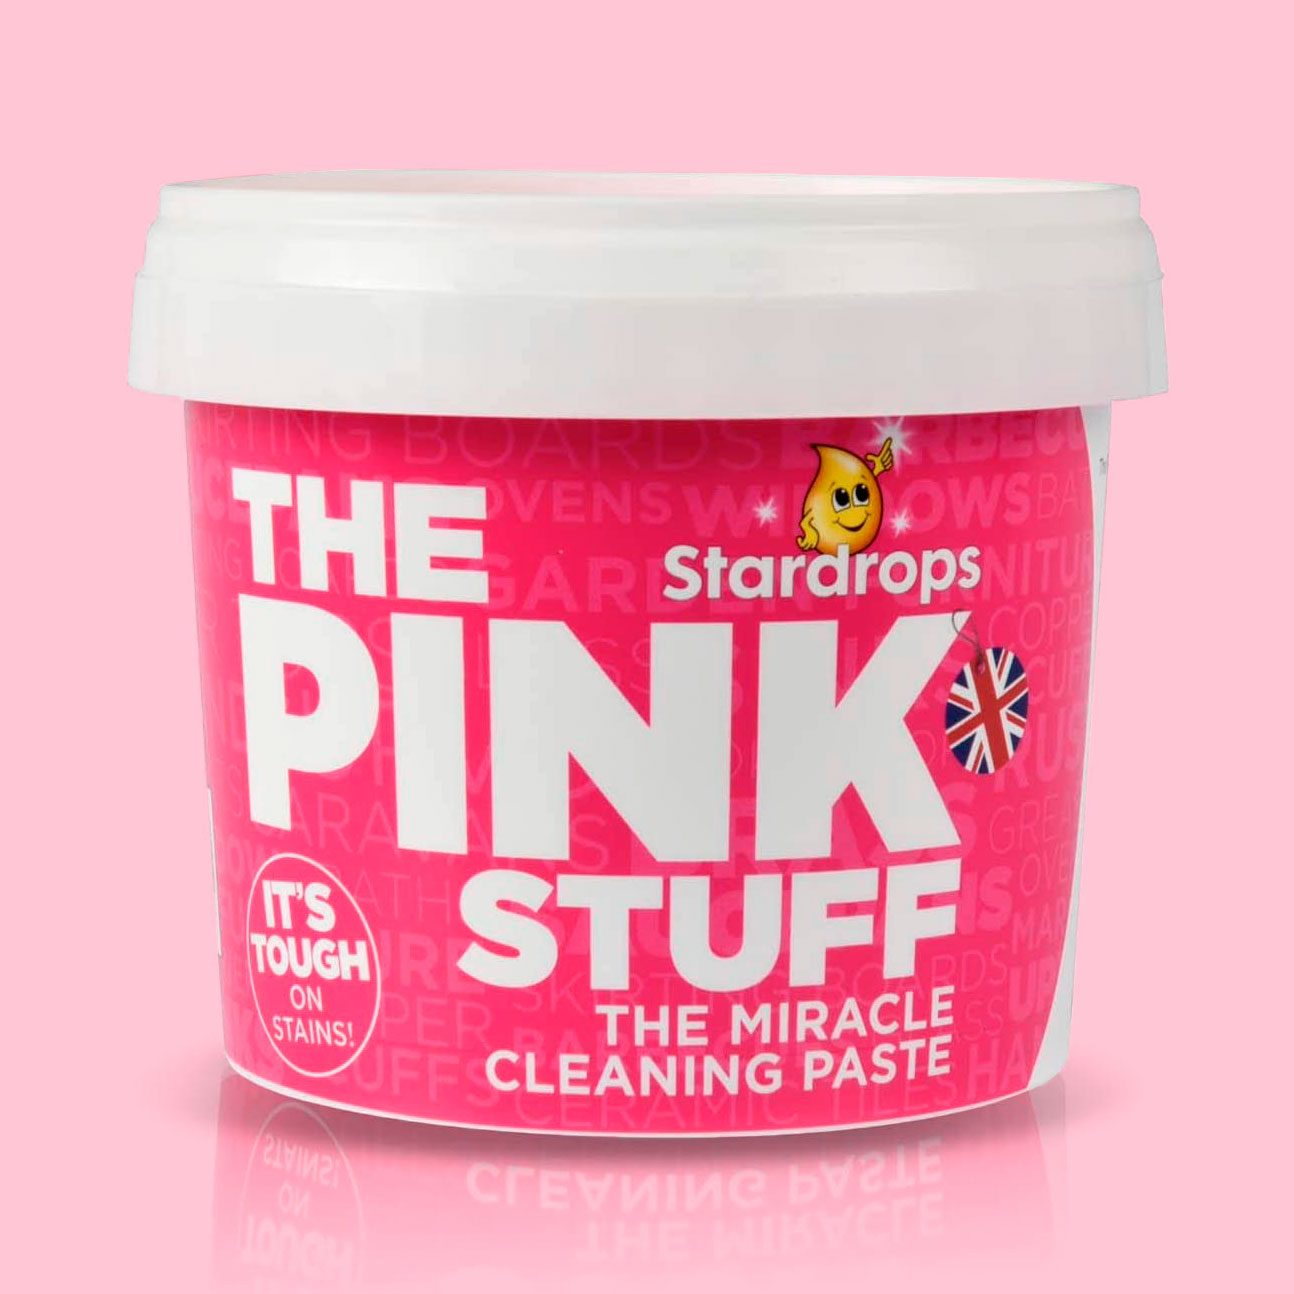 The Pink Stuff Cleaner Review 2023